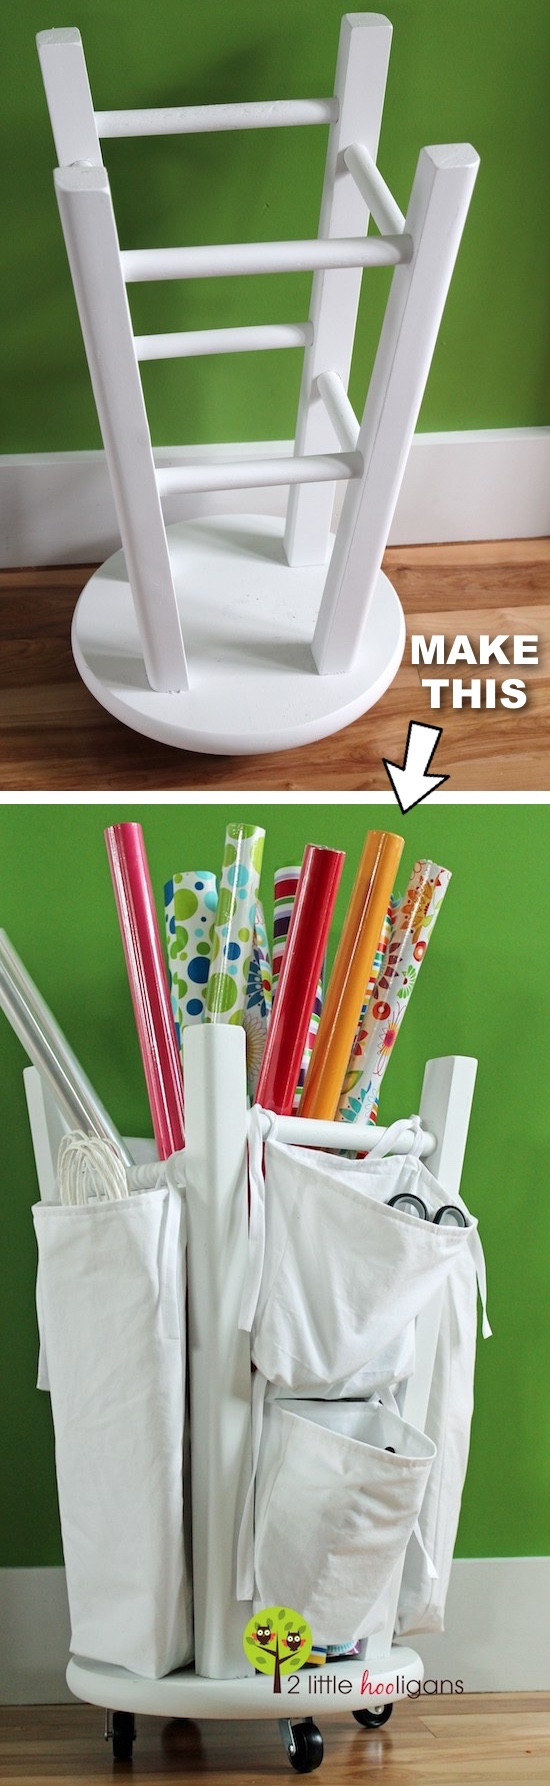 Paper Crafts Ideas For Adults
 Easy DIY Craft Ideas That Will Spark Your Creativity for